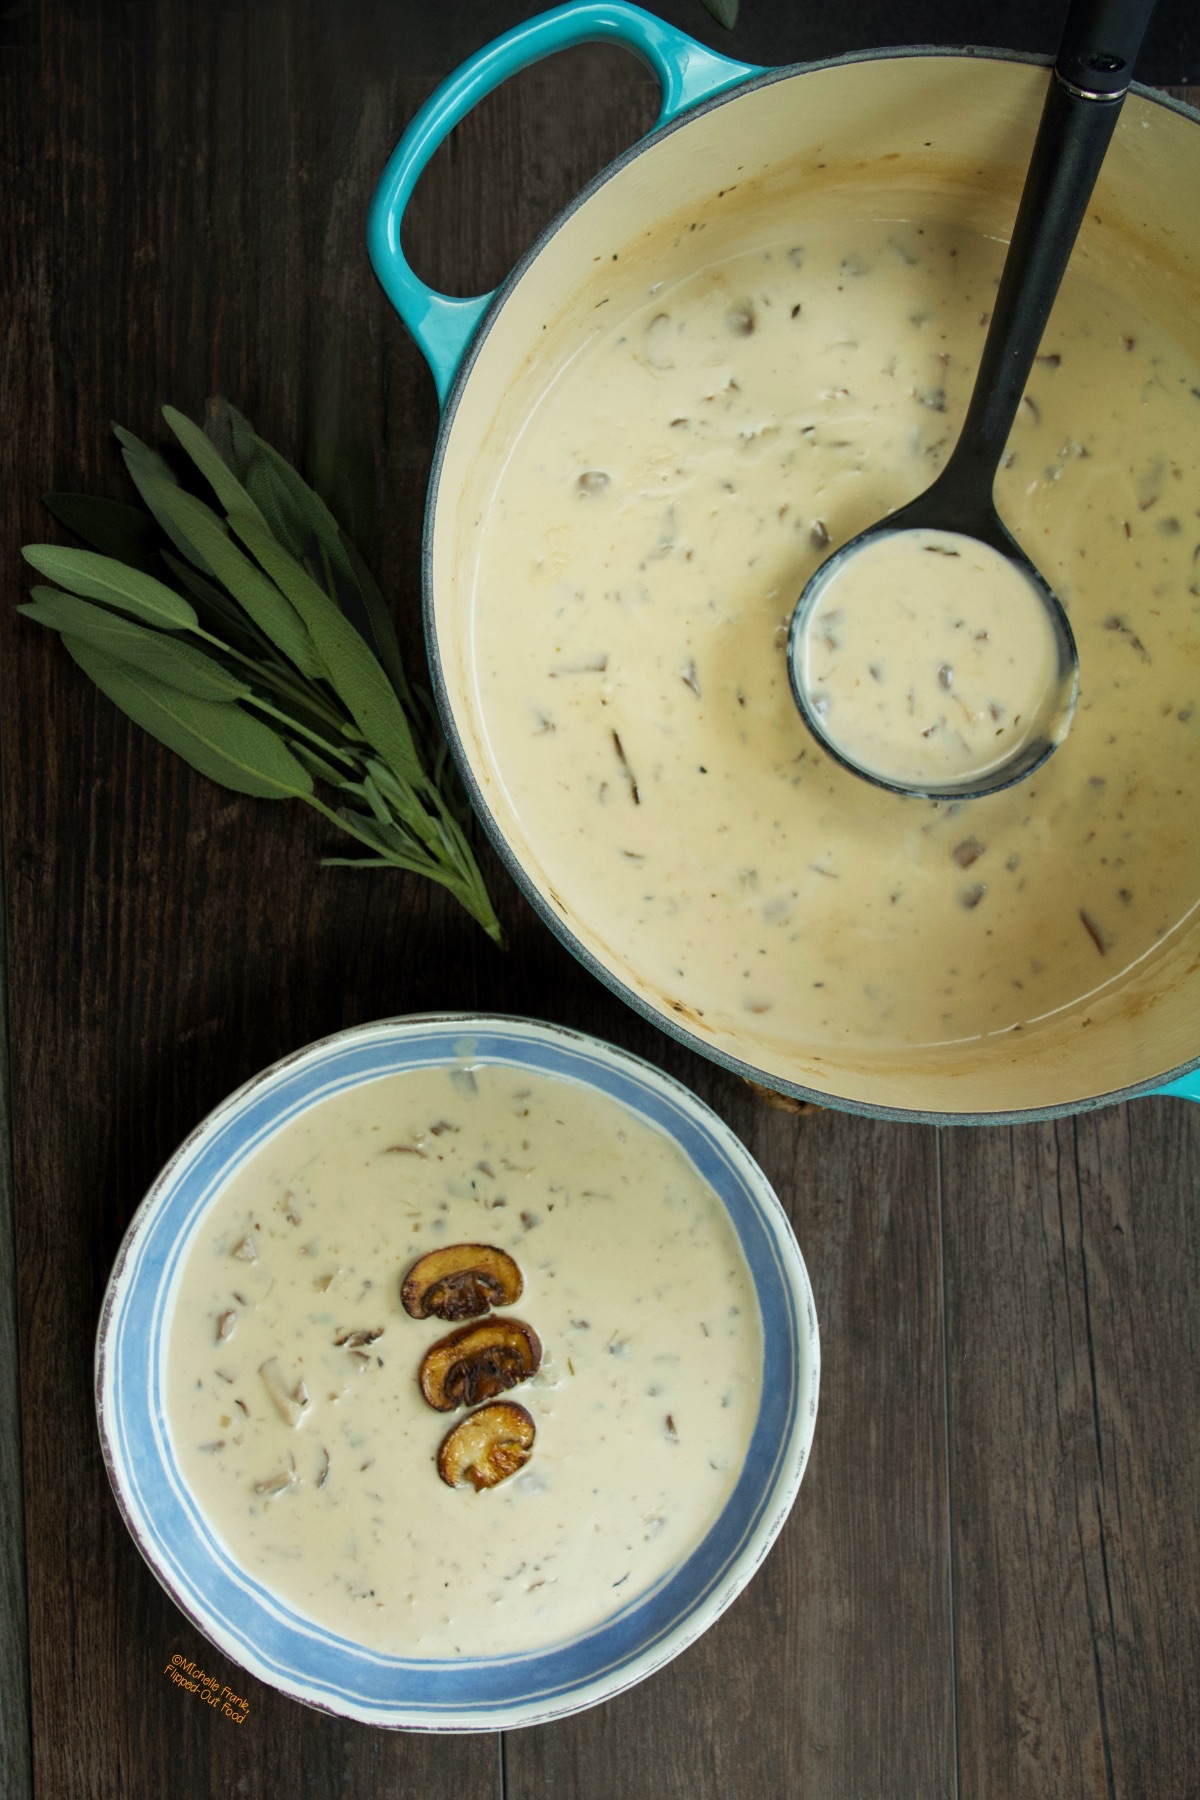 A pot of homemade cream of mushroom soup with a full ladle sits next to a blue and white bowl with a serving of the soup. The soup has been topped with three golden-brown mushroom slices.